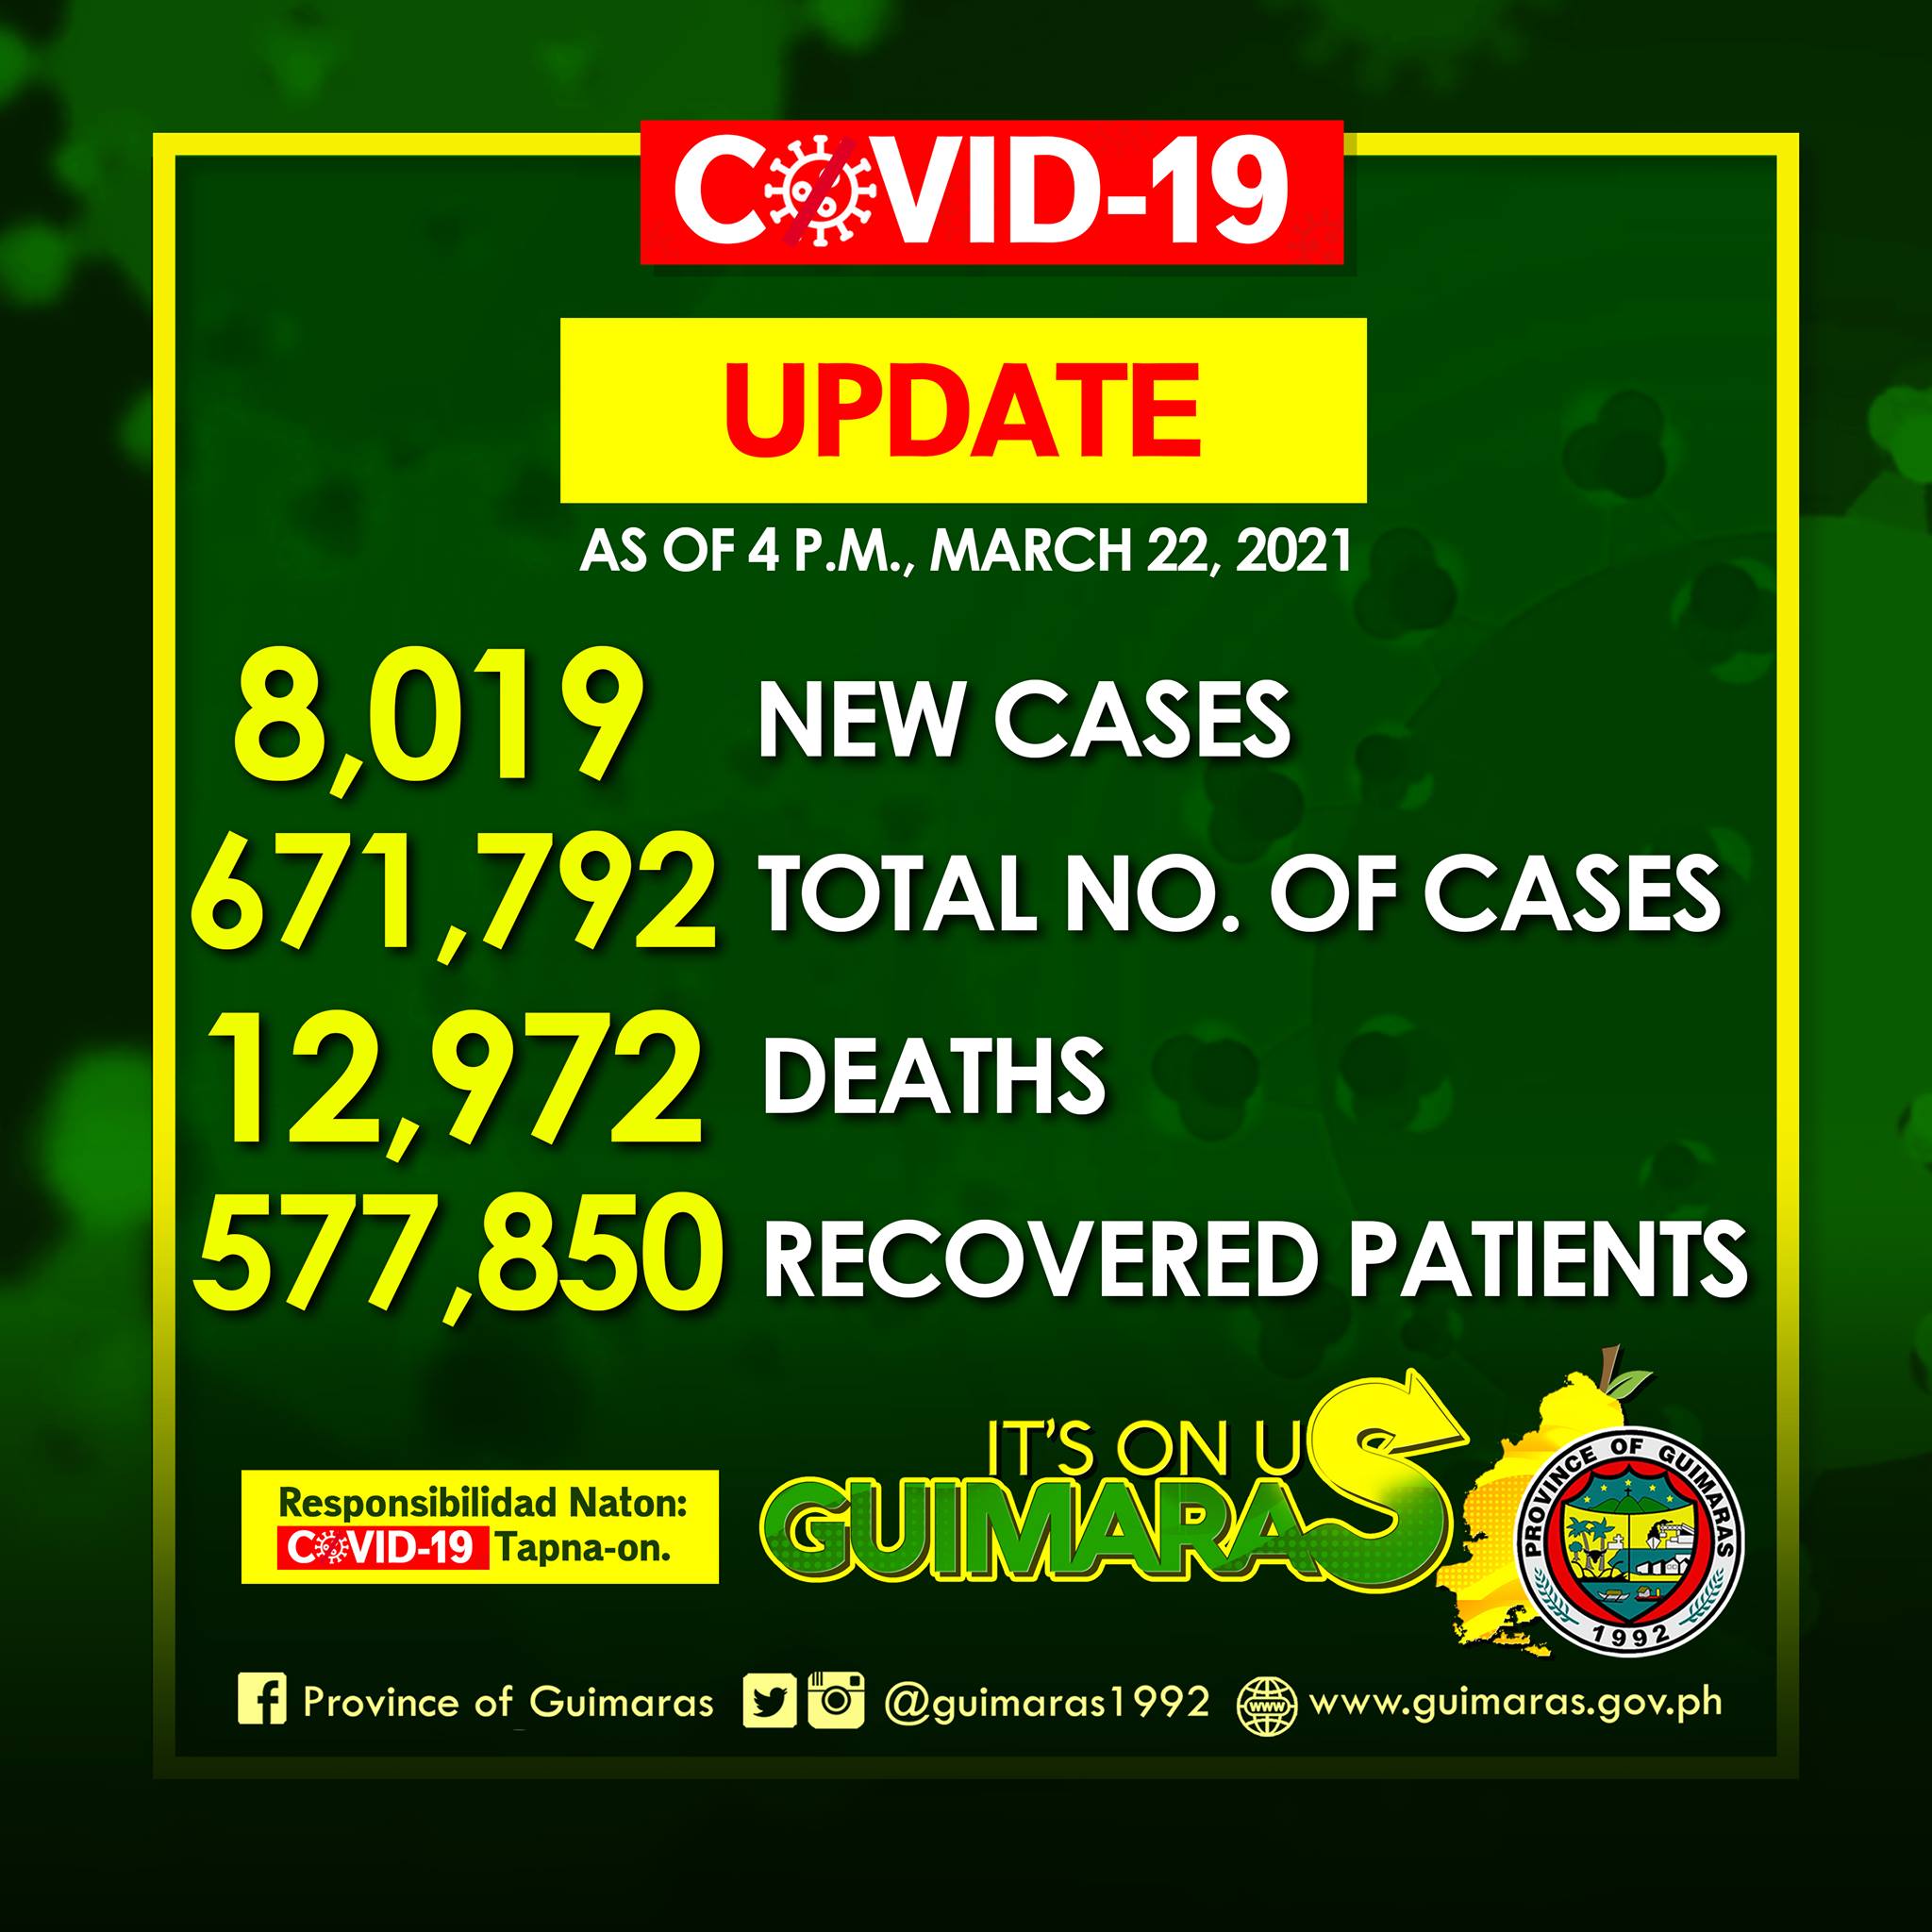 Guimaras COVID-19 Update as of March 22, 2021